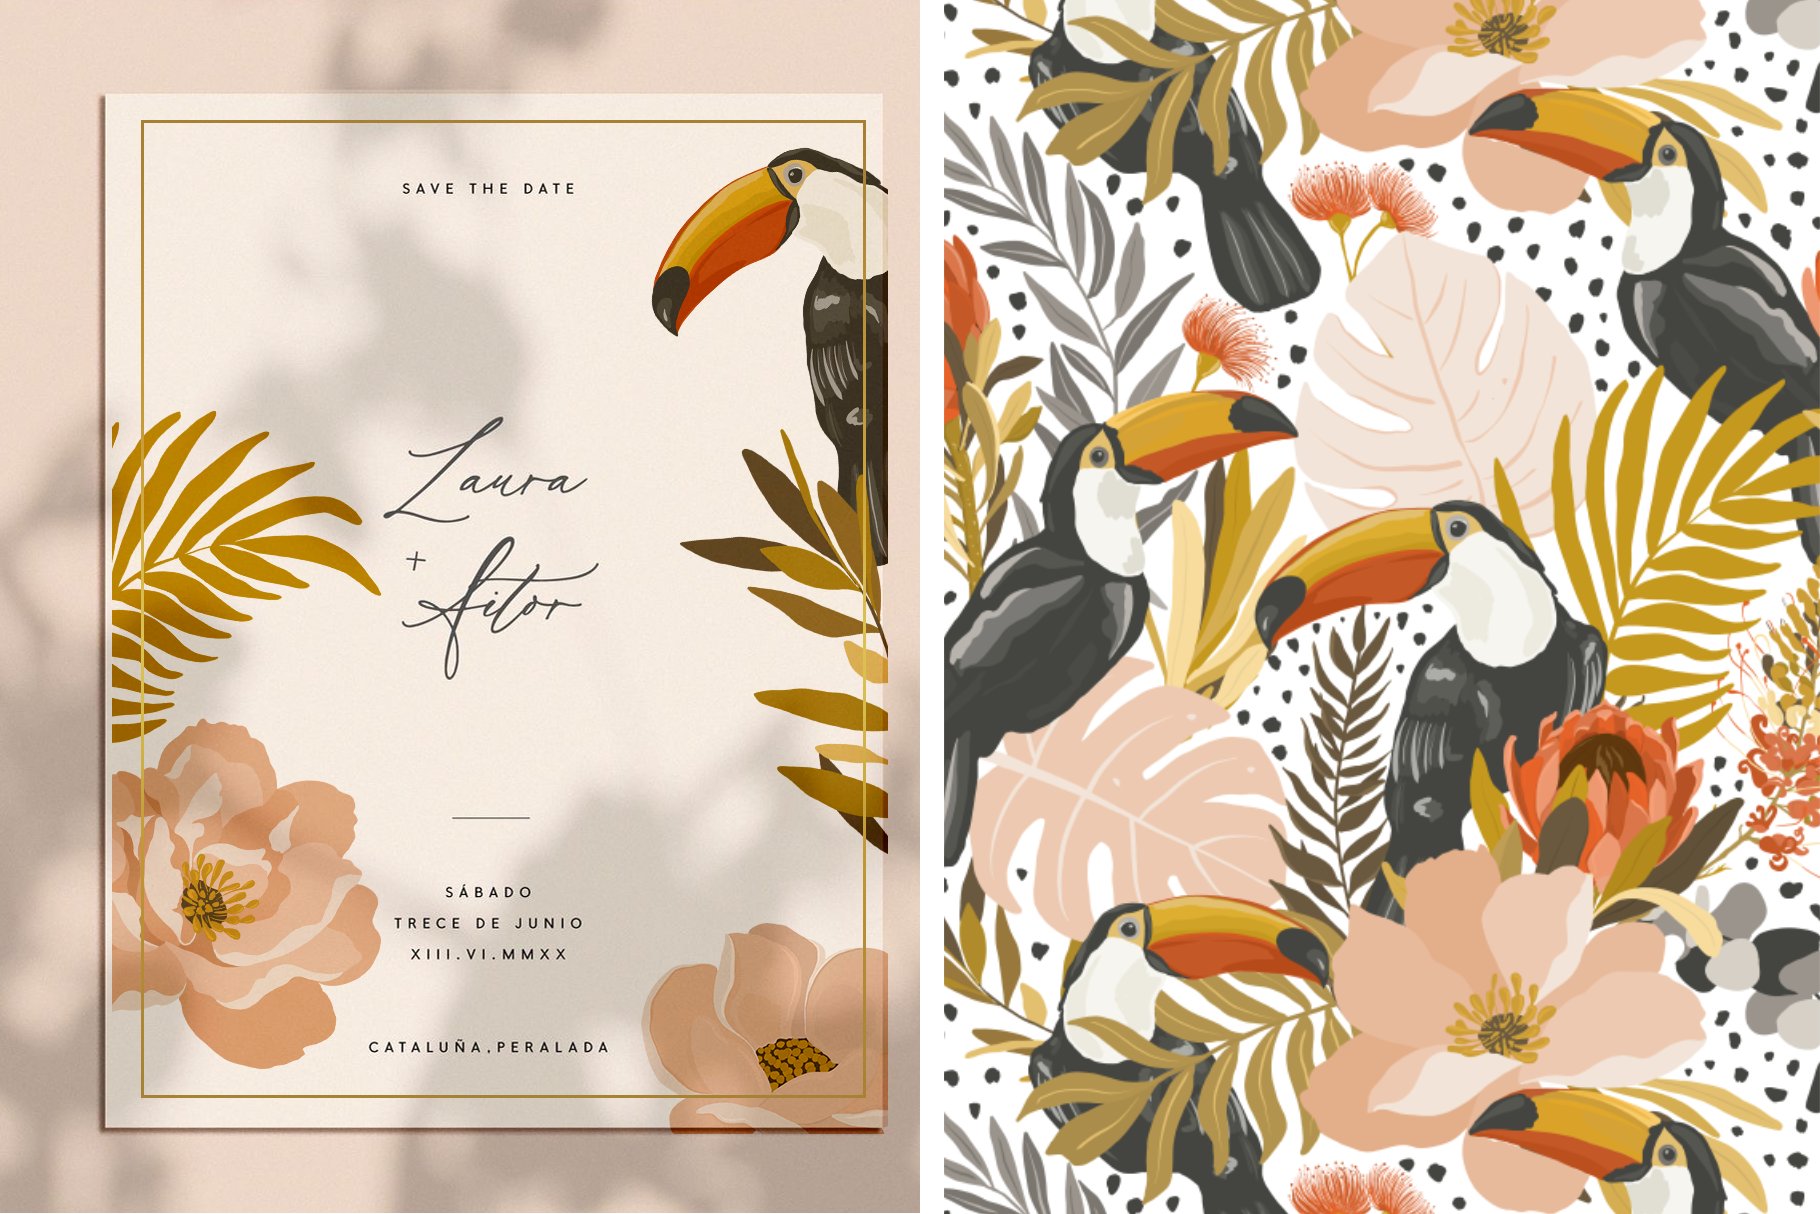 Wedding card with tropical flowers and toucans.